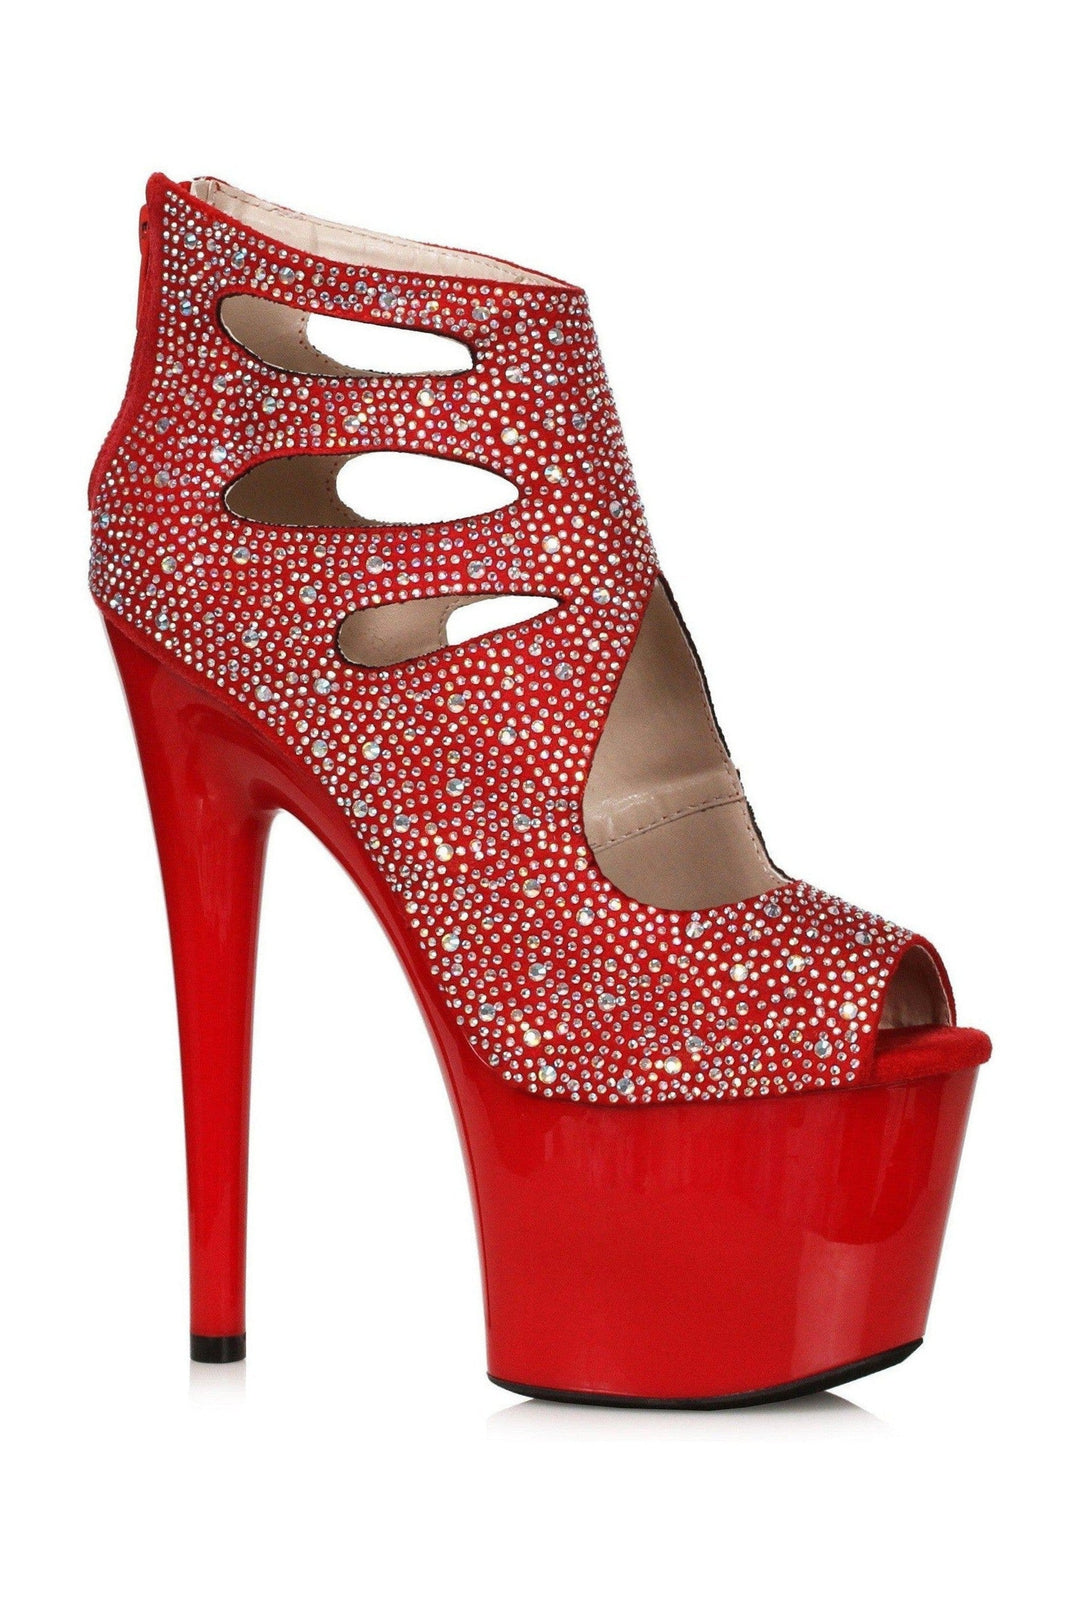 Ellie Shoes Red Ankle Boots Platform Stripper Shoes | Buy at Sexyshoes.com